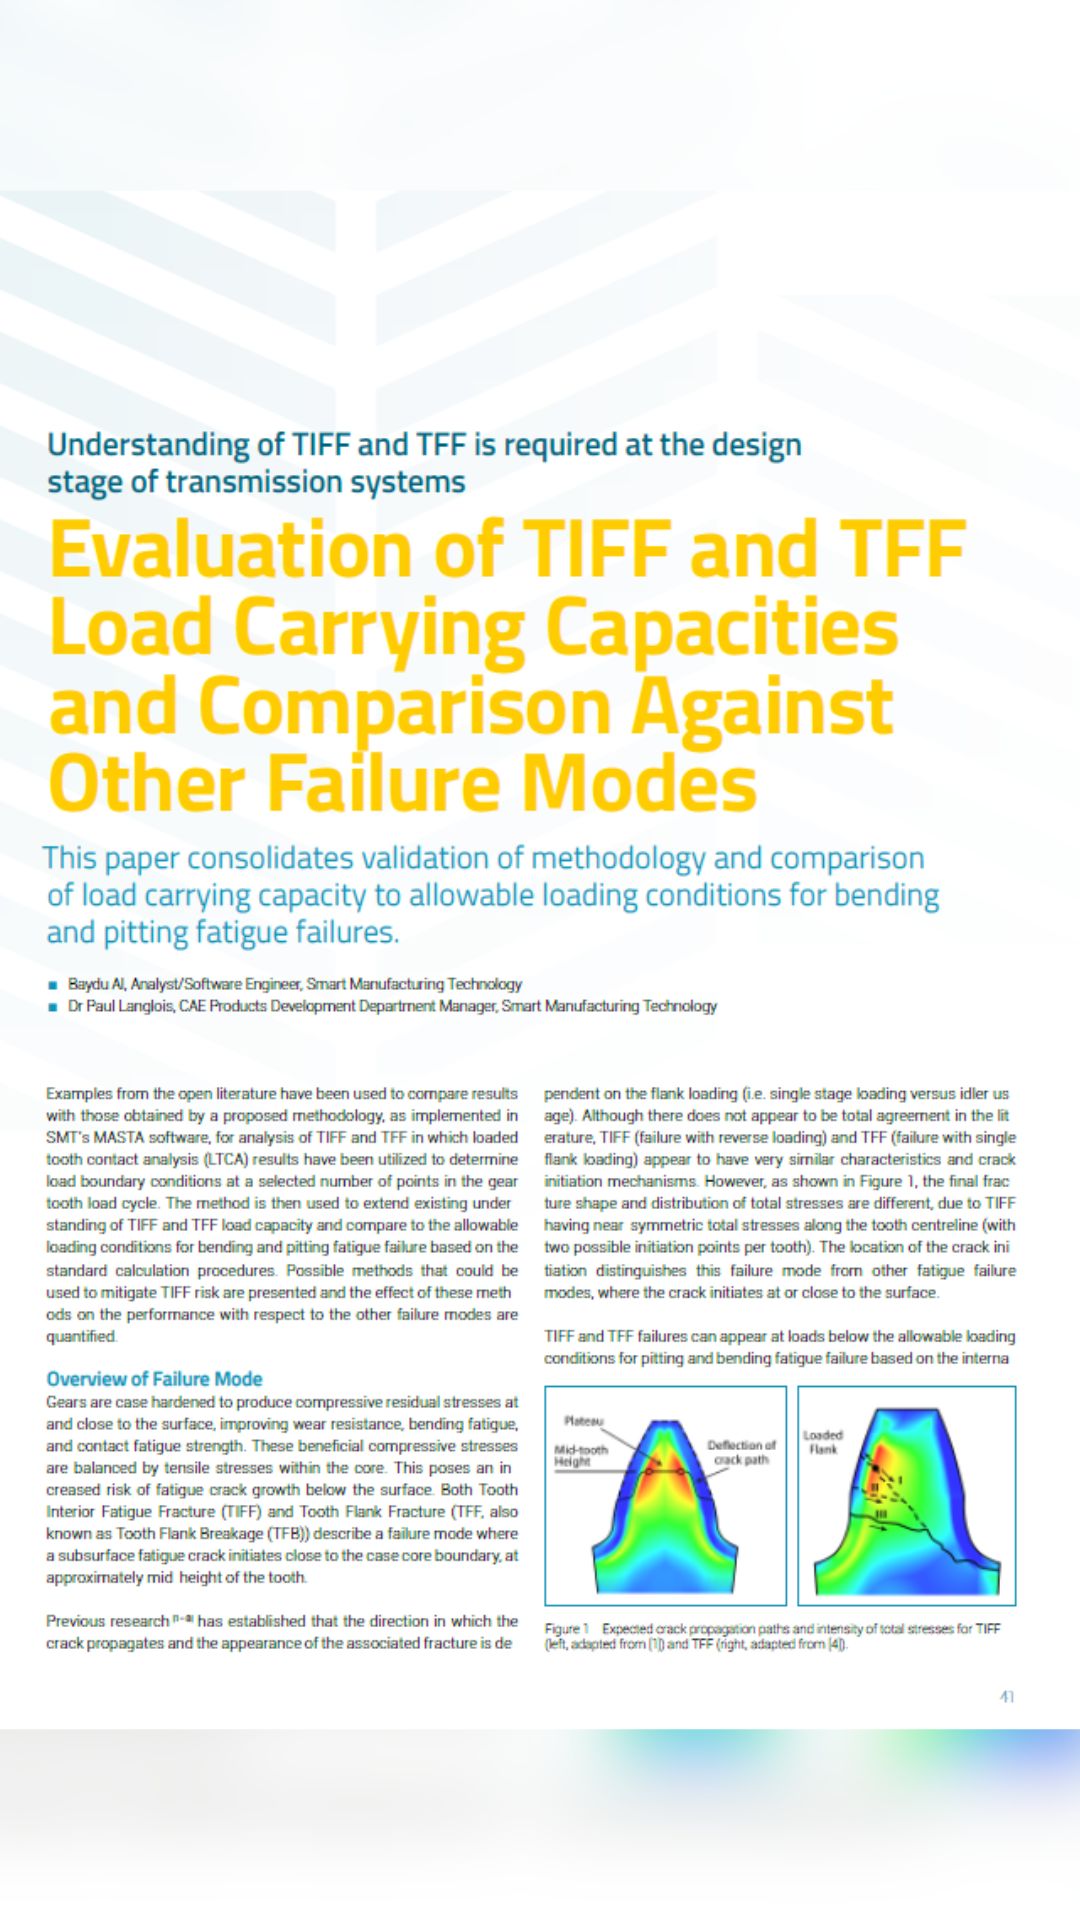 CTI 2016 Evaluation of TIFF and TFF Load Carrying Capacities and Comparison Against Other Failure Modes article.